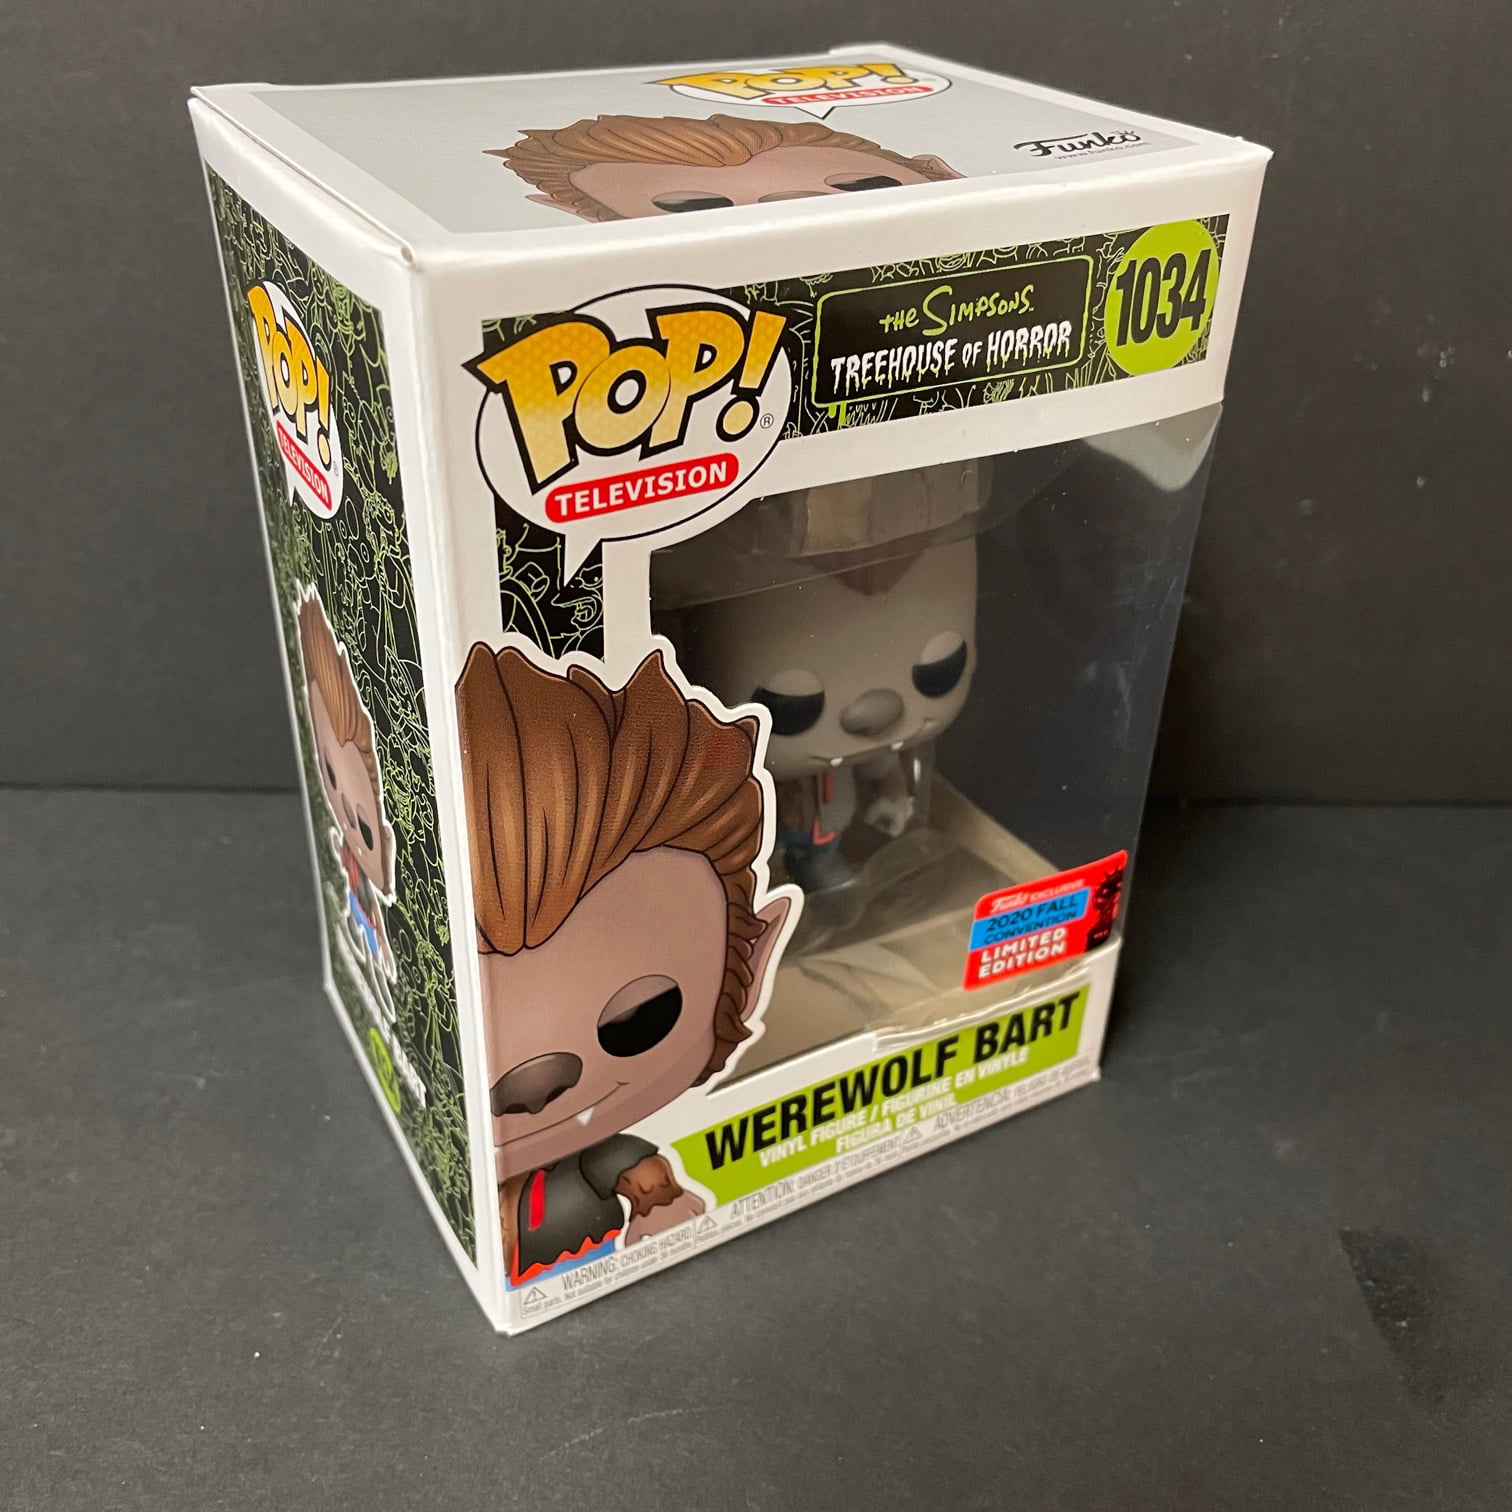 WEREWOLF BART NYCC 2020 CON EXCL FUNKO POP SIMPSONS TREEHOUSE 1034 brand new uk 